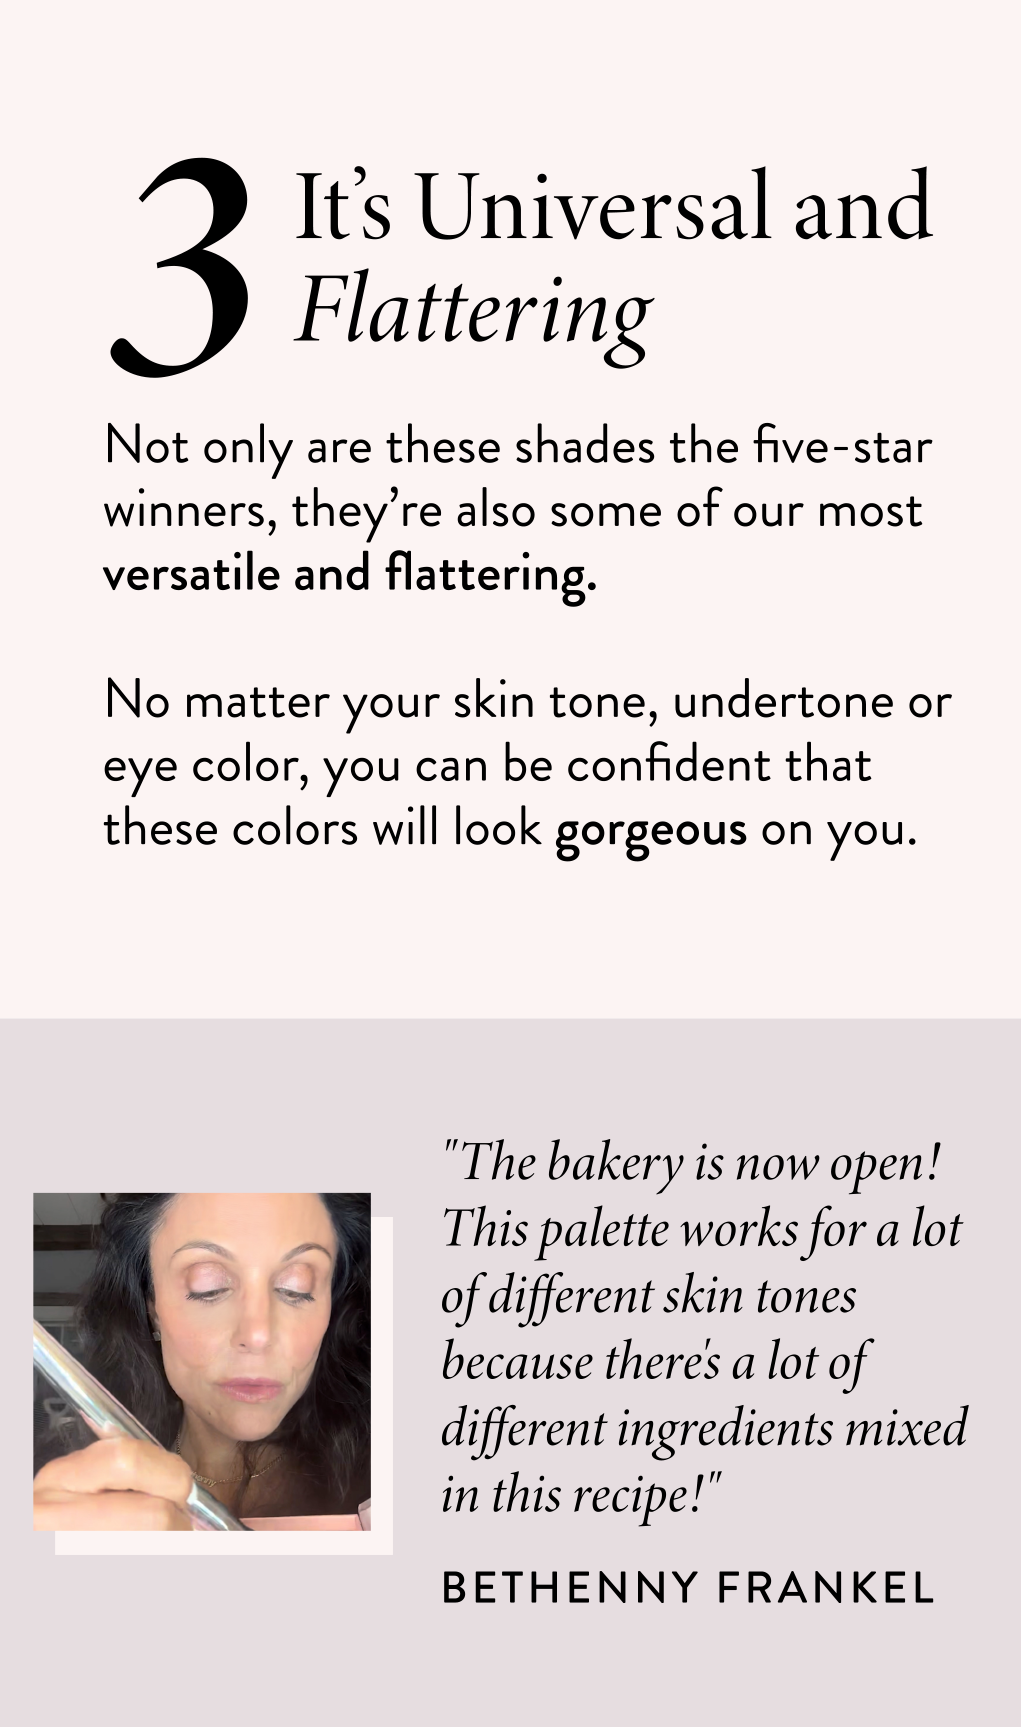 It’s Universal and Flattering Not only are these shades the five-star winners, they’re also some of our most versatile and flattering.  No matter your skin tone, undertone or eye color, you can be confident that these colors will look gorgeous on you.